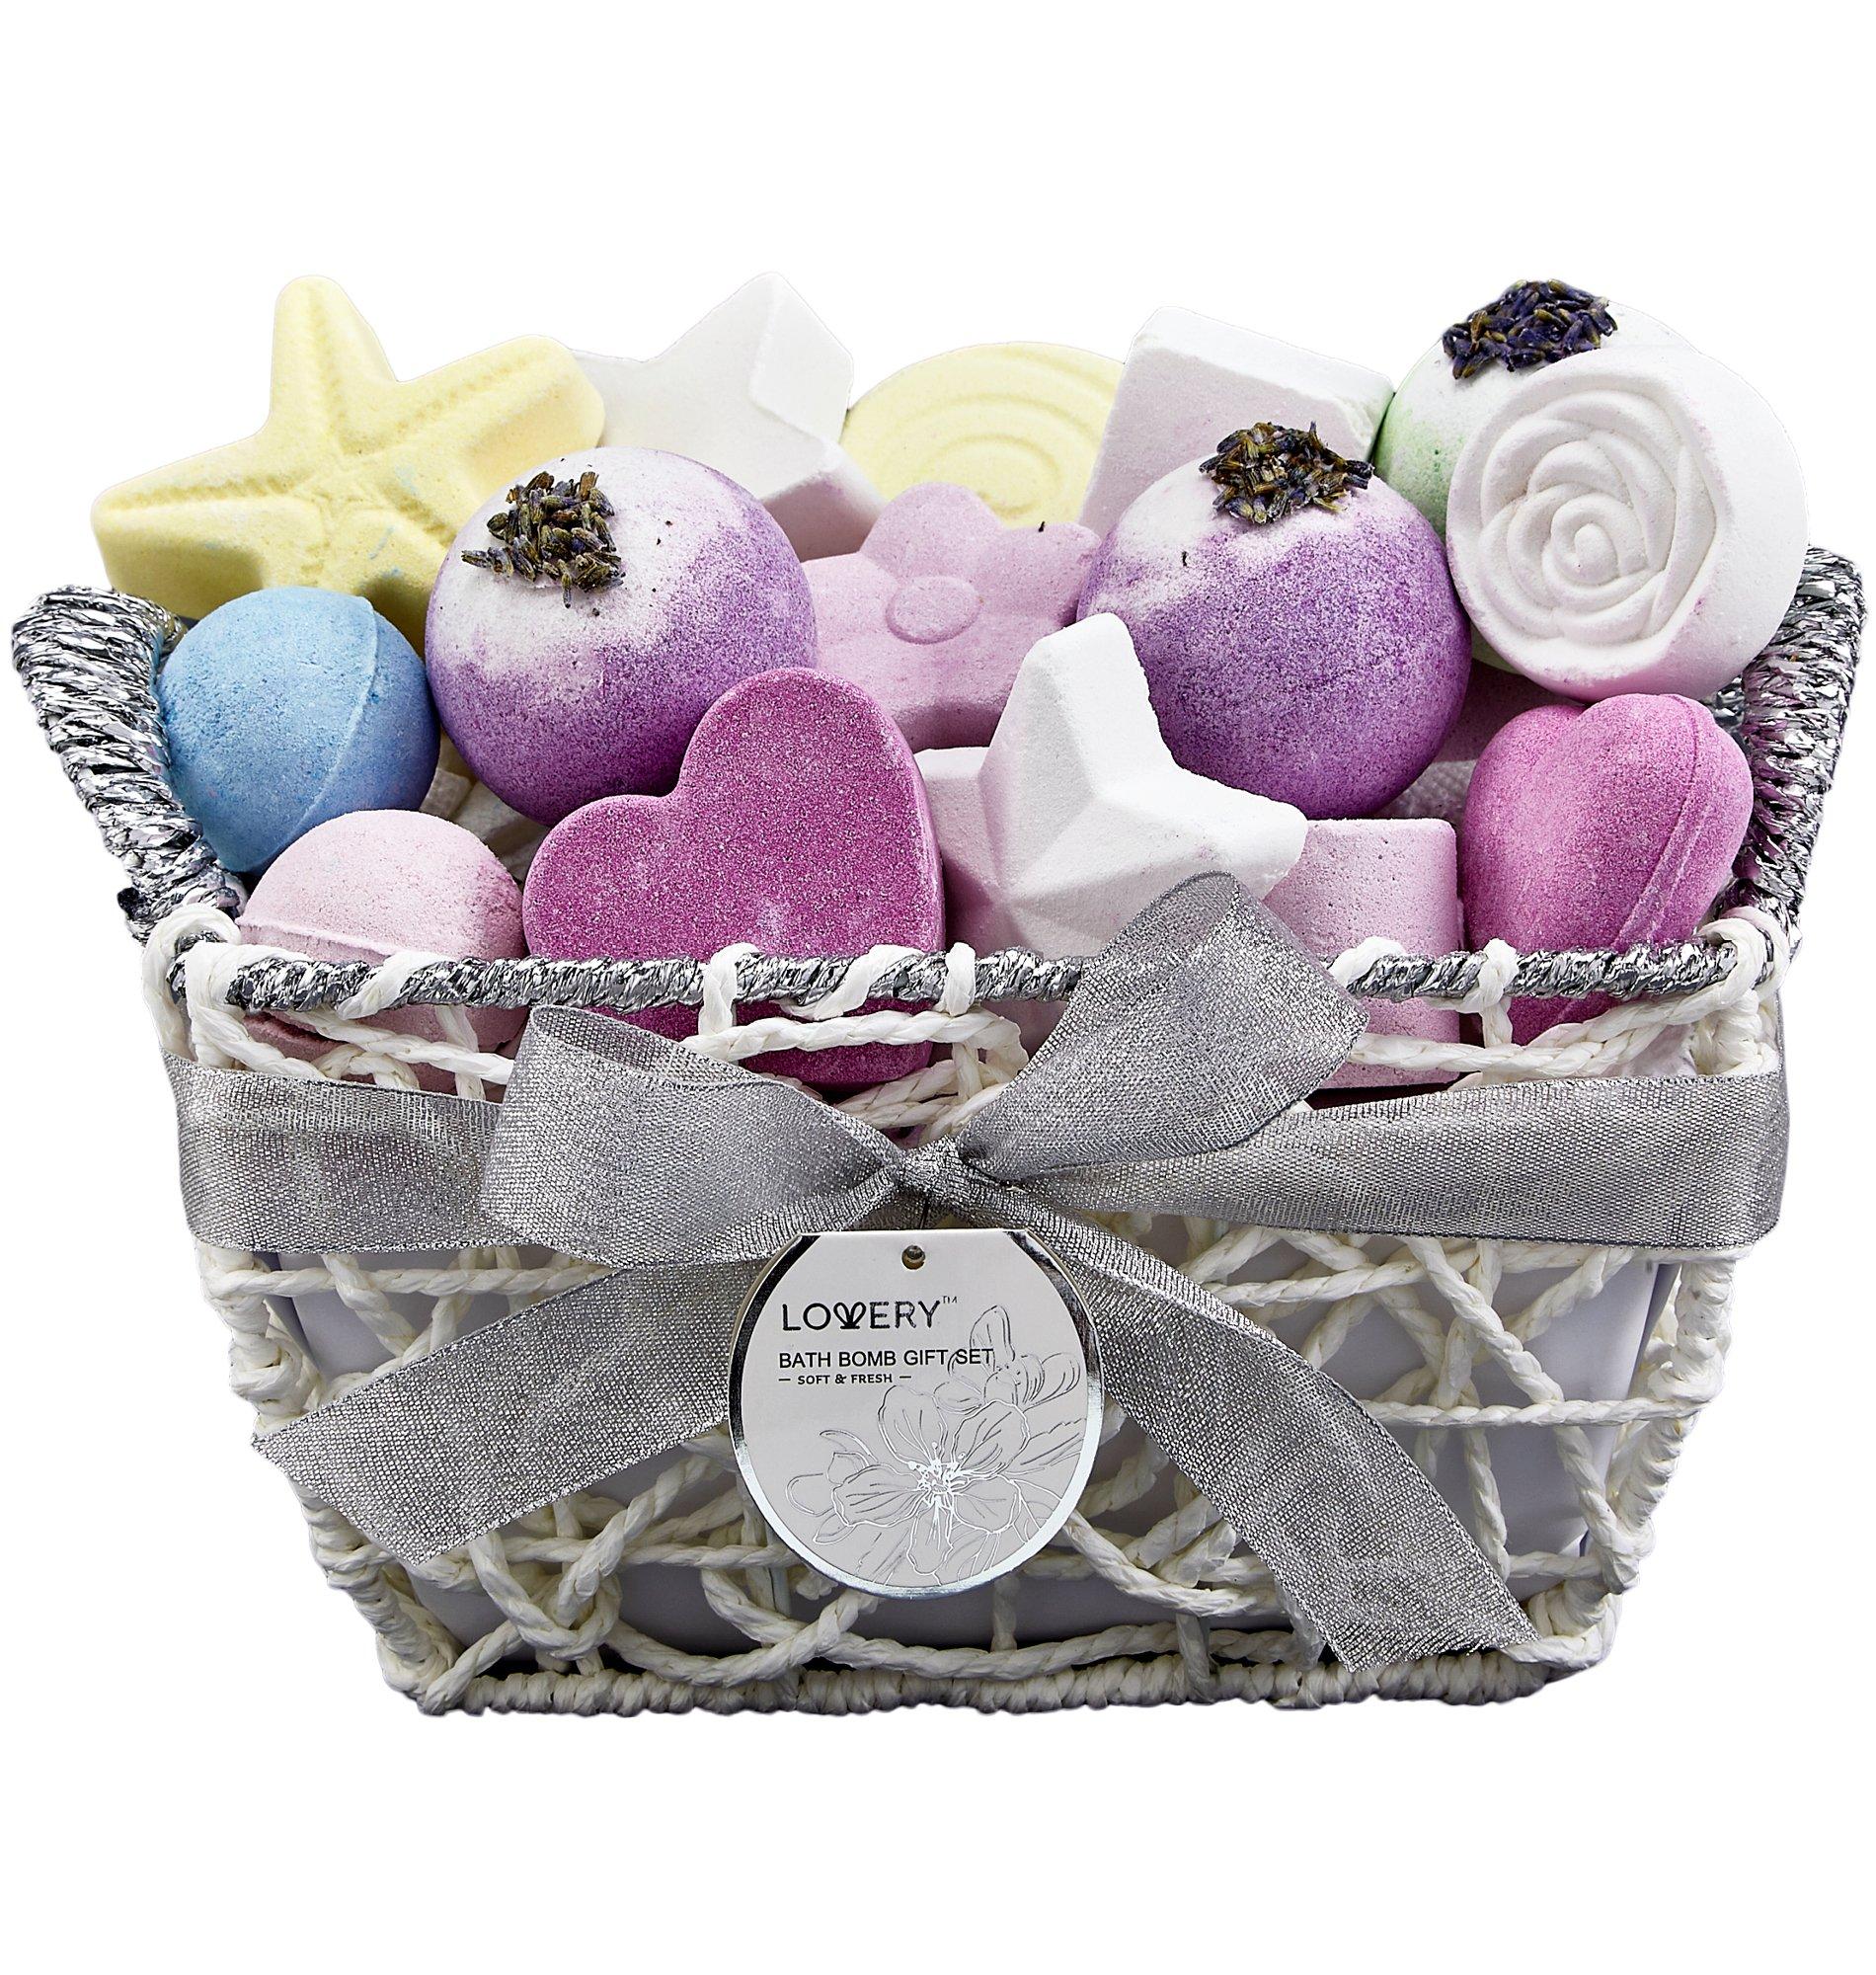 Lovery Bath Bombs Gift Set for Women – 17 Large Bath Fizzies in Assorted Colors, Shapes